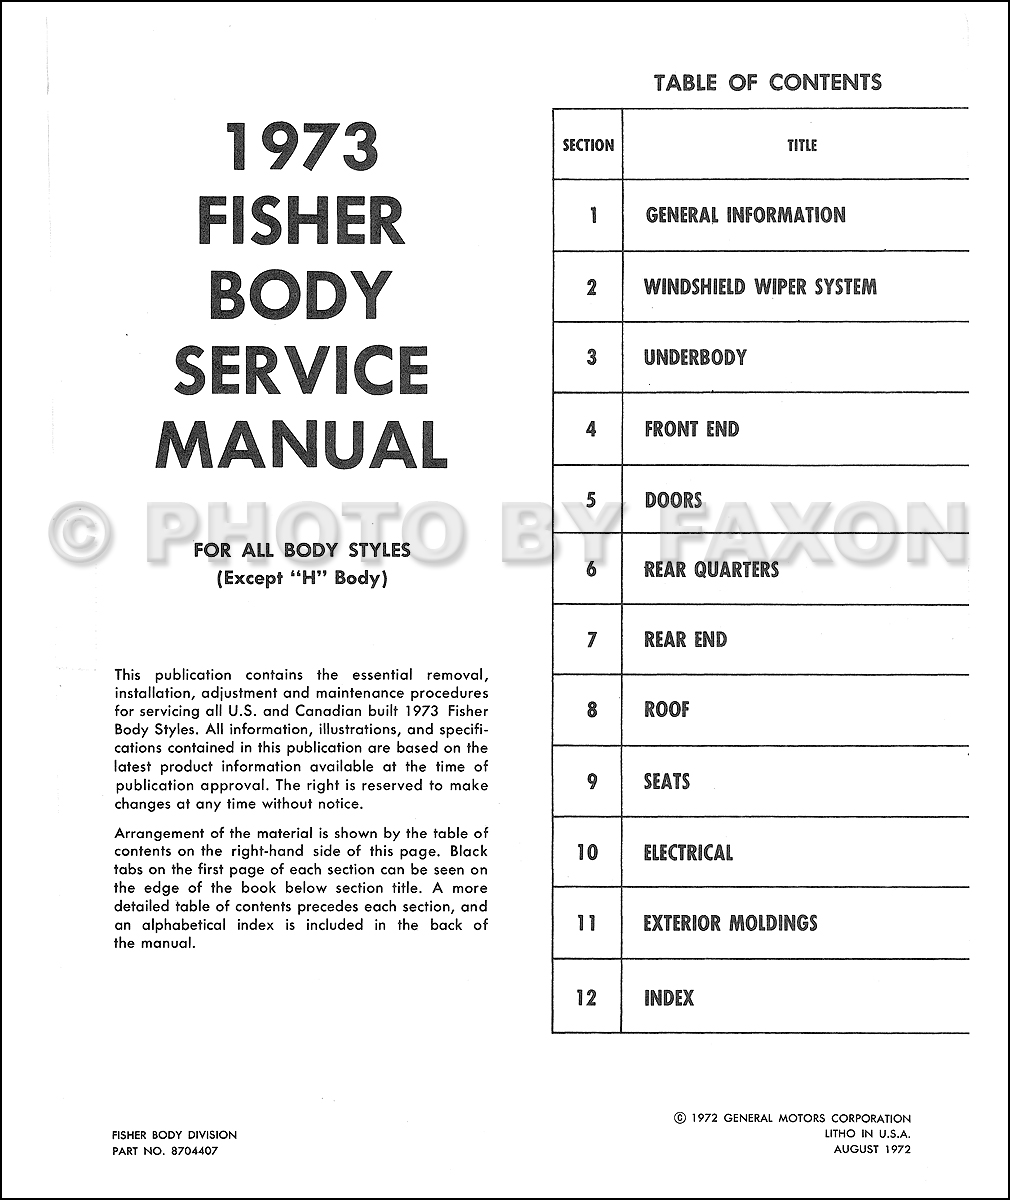 Body table of contents